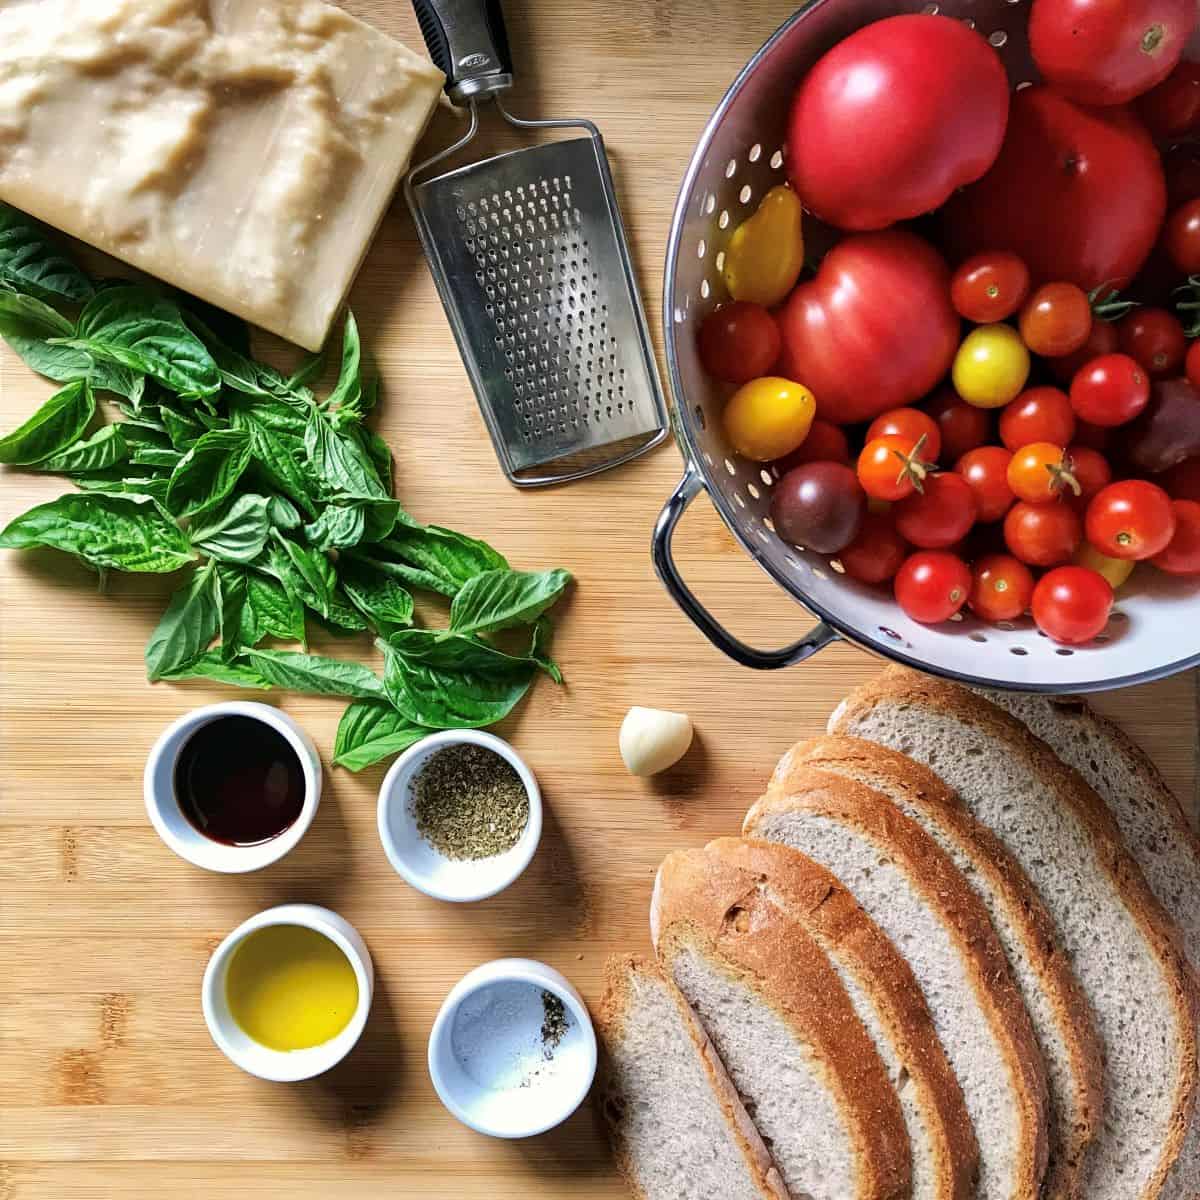 Some of the ingredients required to make Tomato Bruschetta include Italian rustic bread, garden fresh tomatoes and basil.